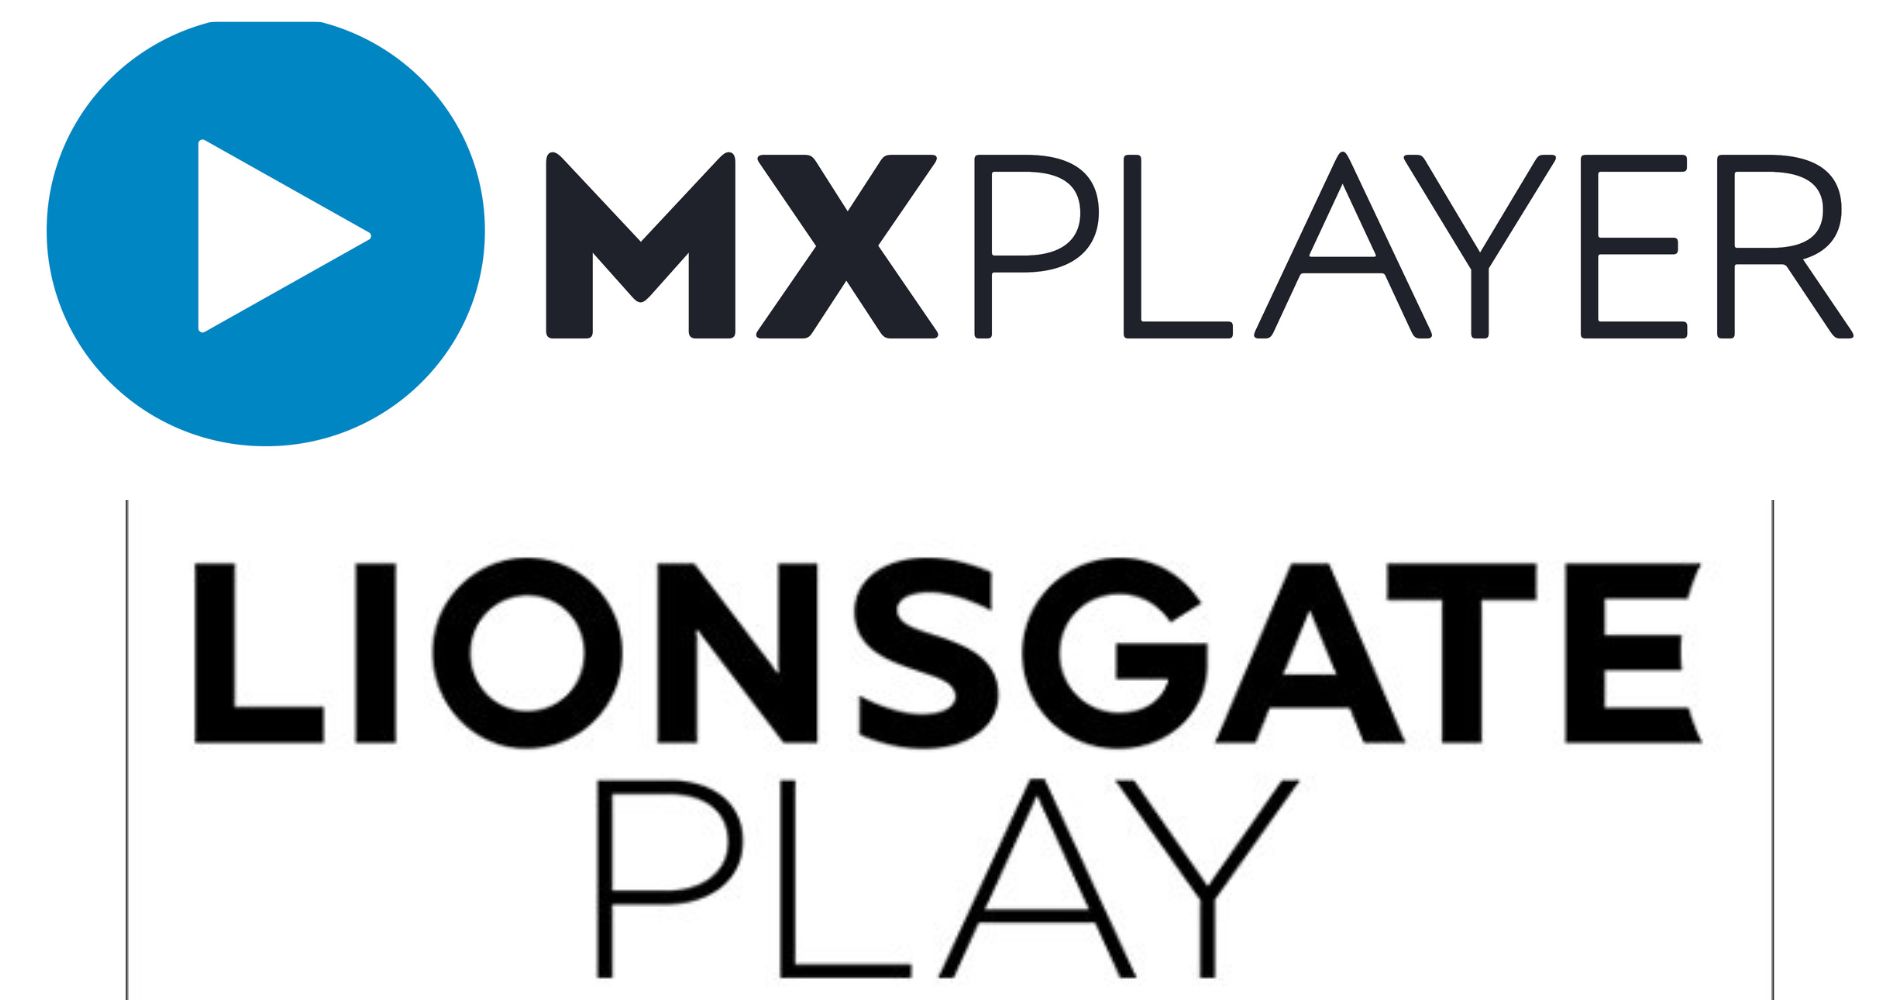 MX Player gets into a multi-year partnership with Lionsgate for